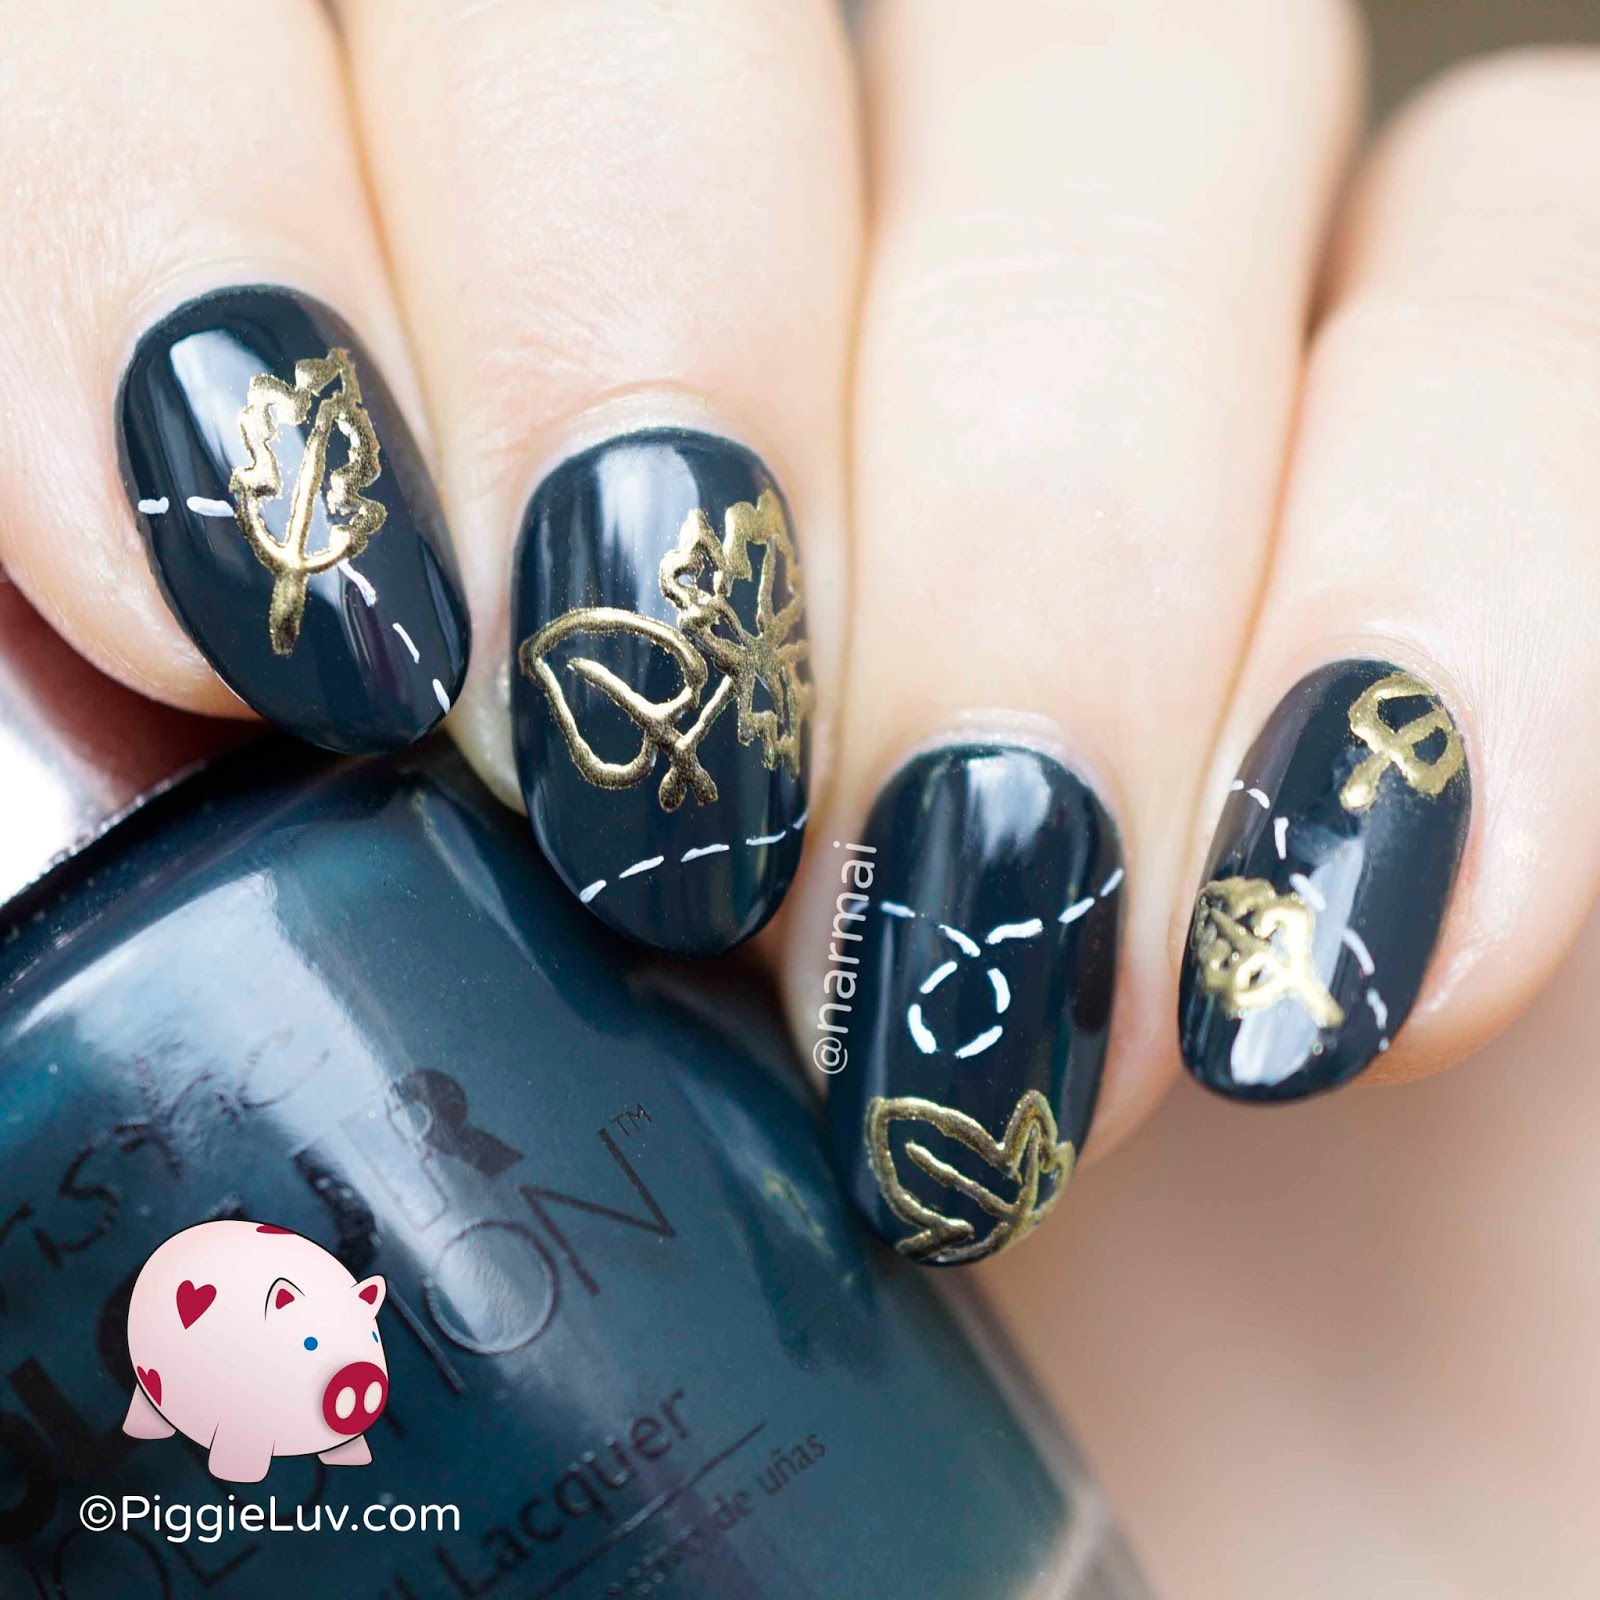 Feather Nail Art Design Using Gold Foil Leaf with a Bit of Bling - YouTube